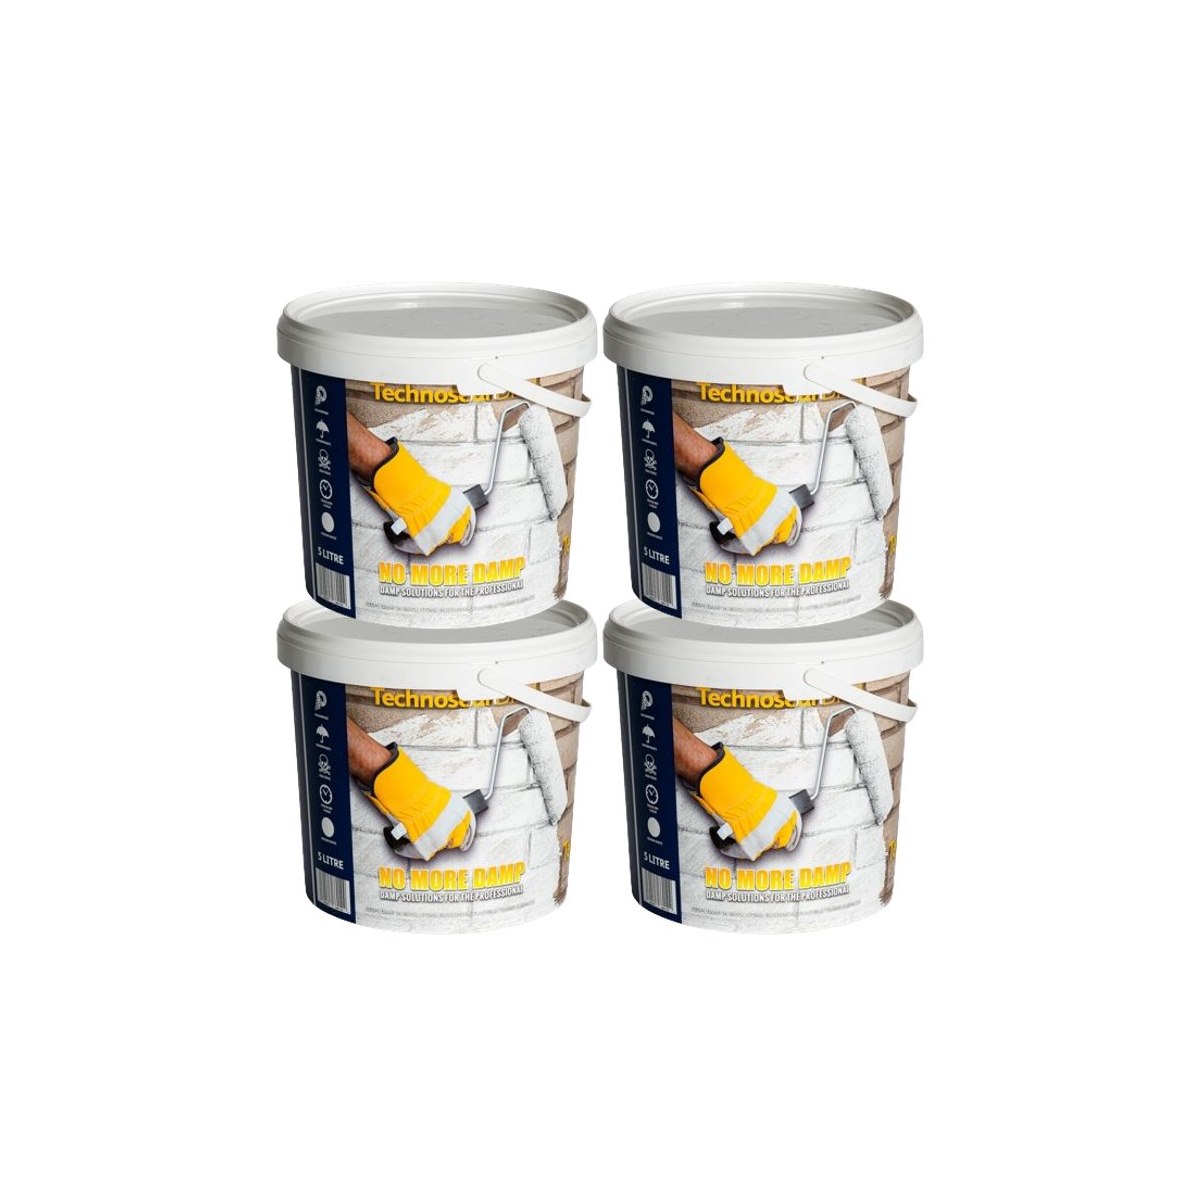 Case of 4 x Wykamol Technoseal DPM Damp Proof Paint 5 Litre White